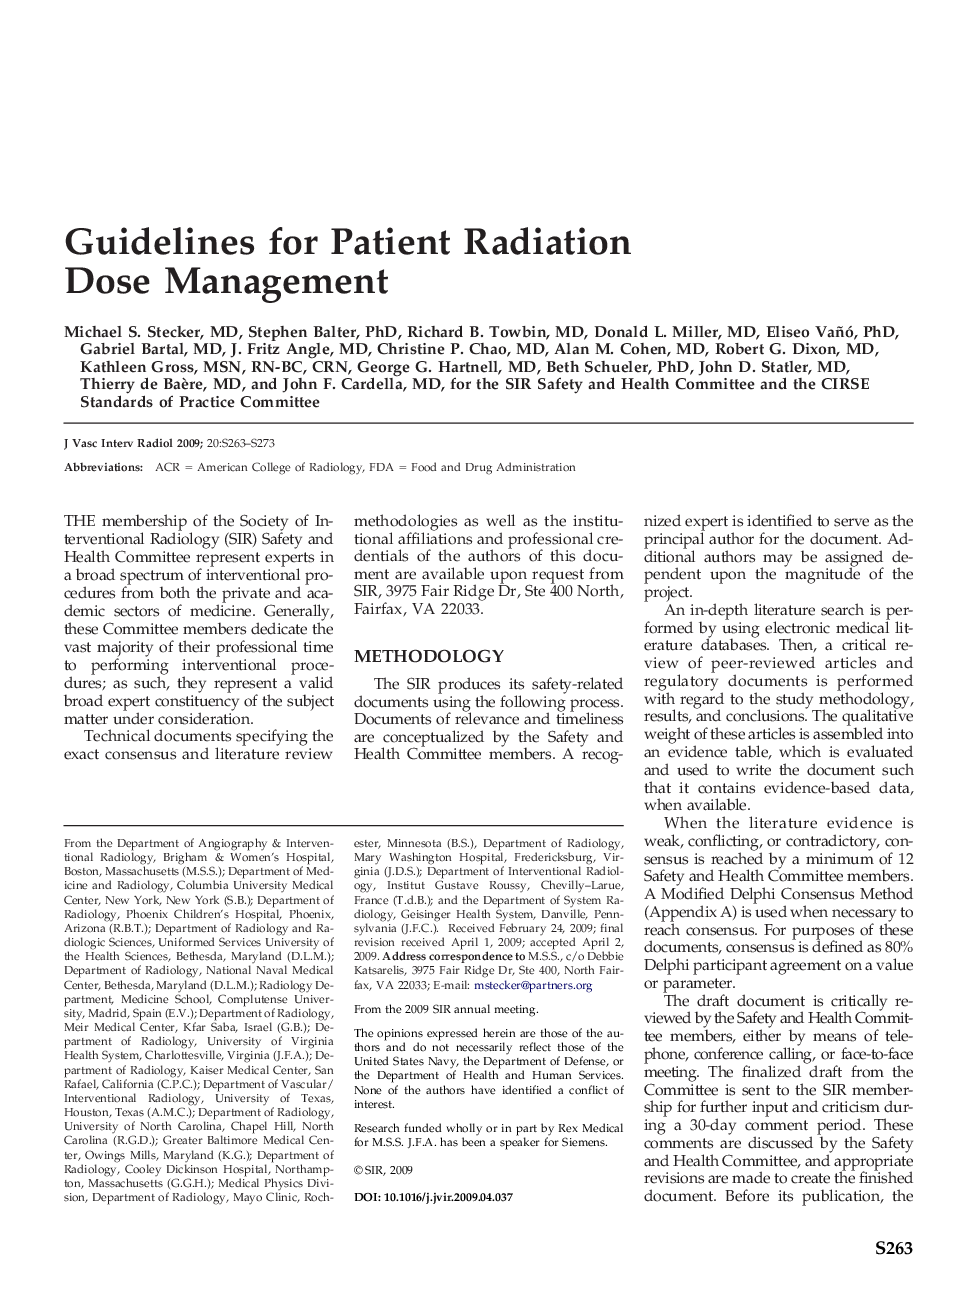 Guidelines for Patient Radiation Dose Management